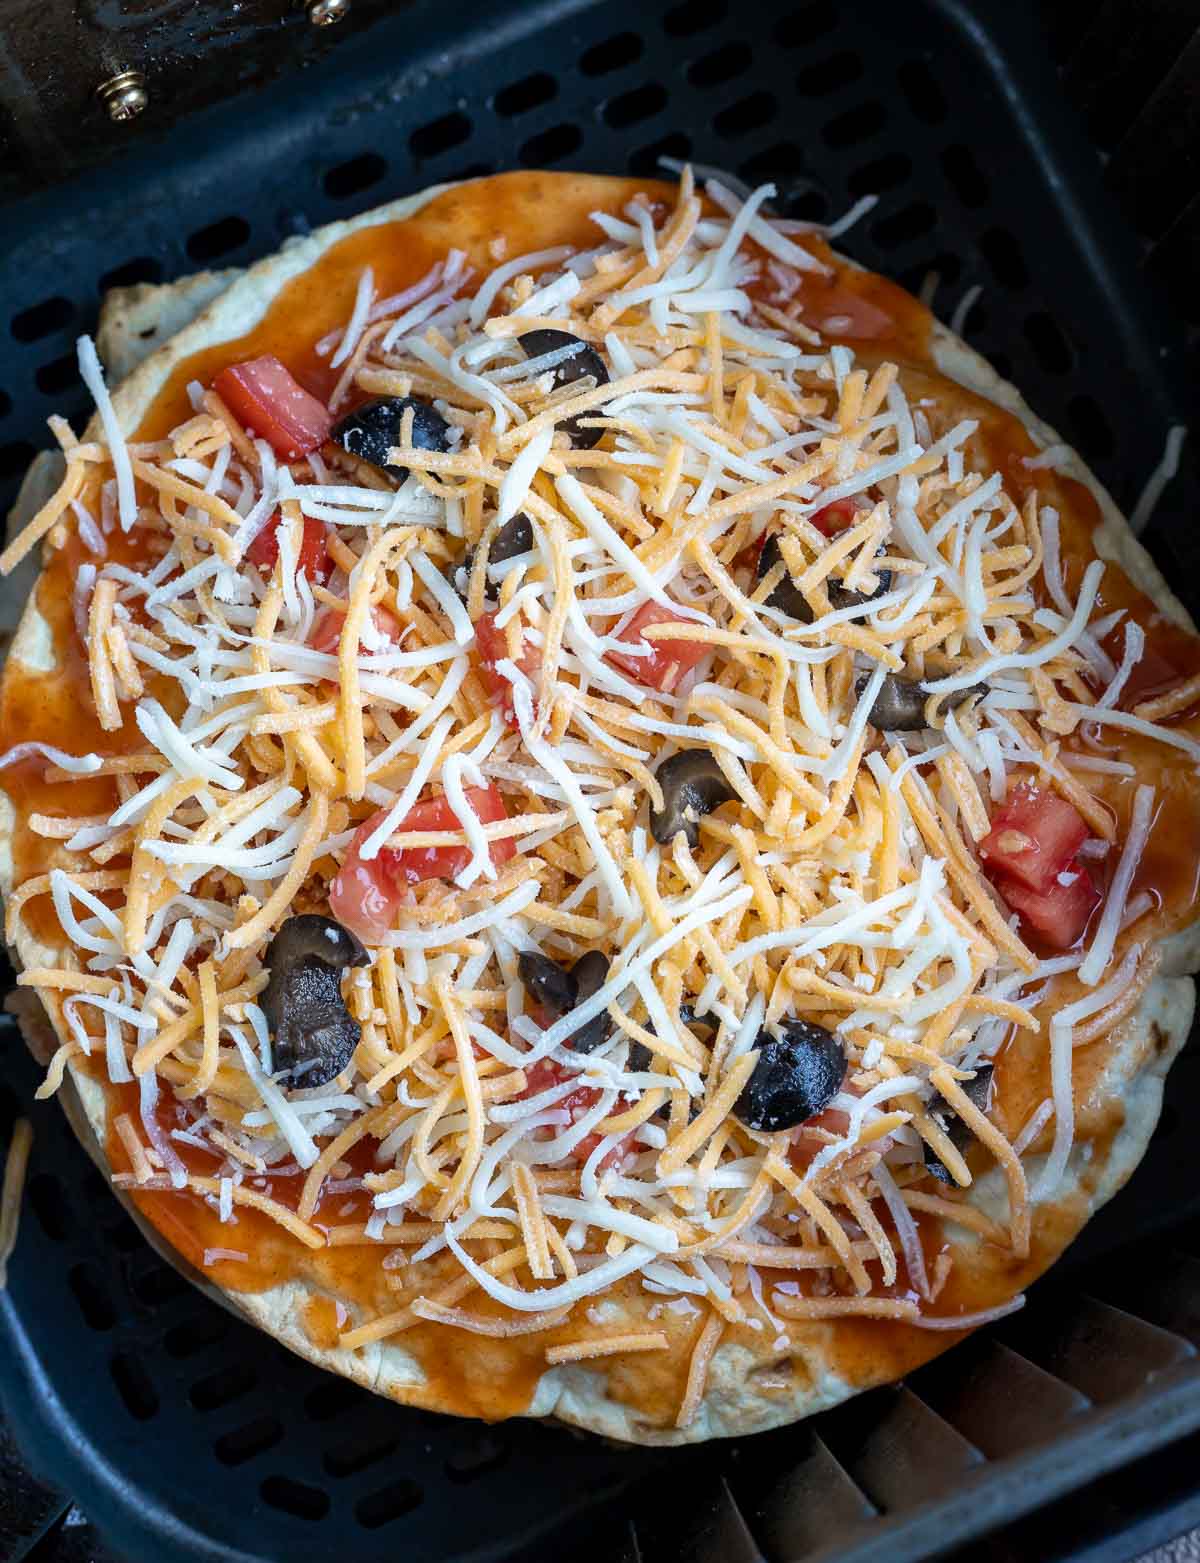 assembled uncooked Mexican pizza in air fryer basket